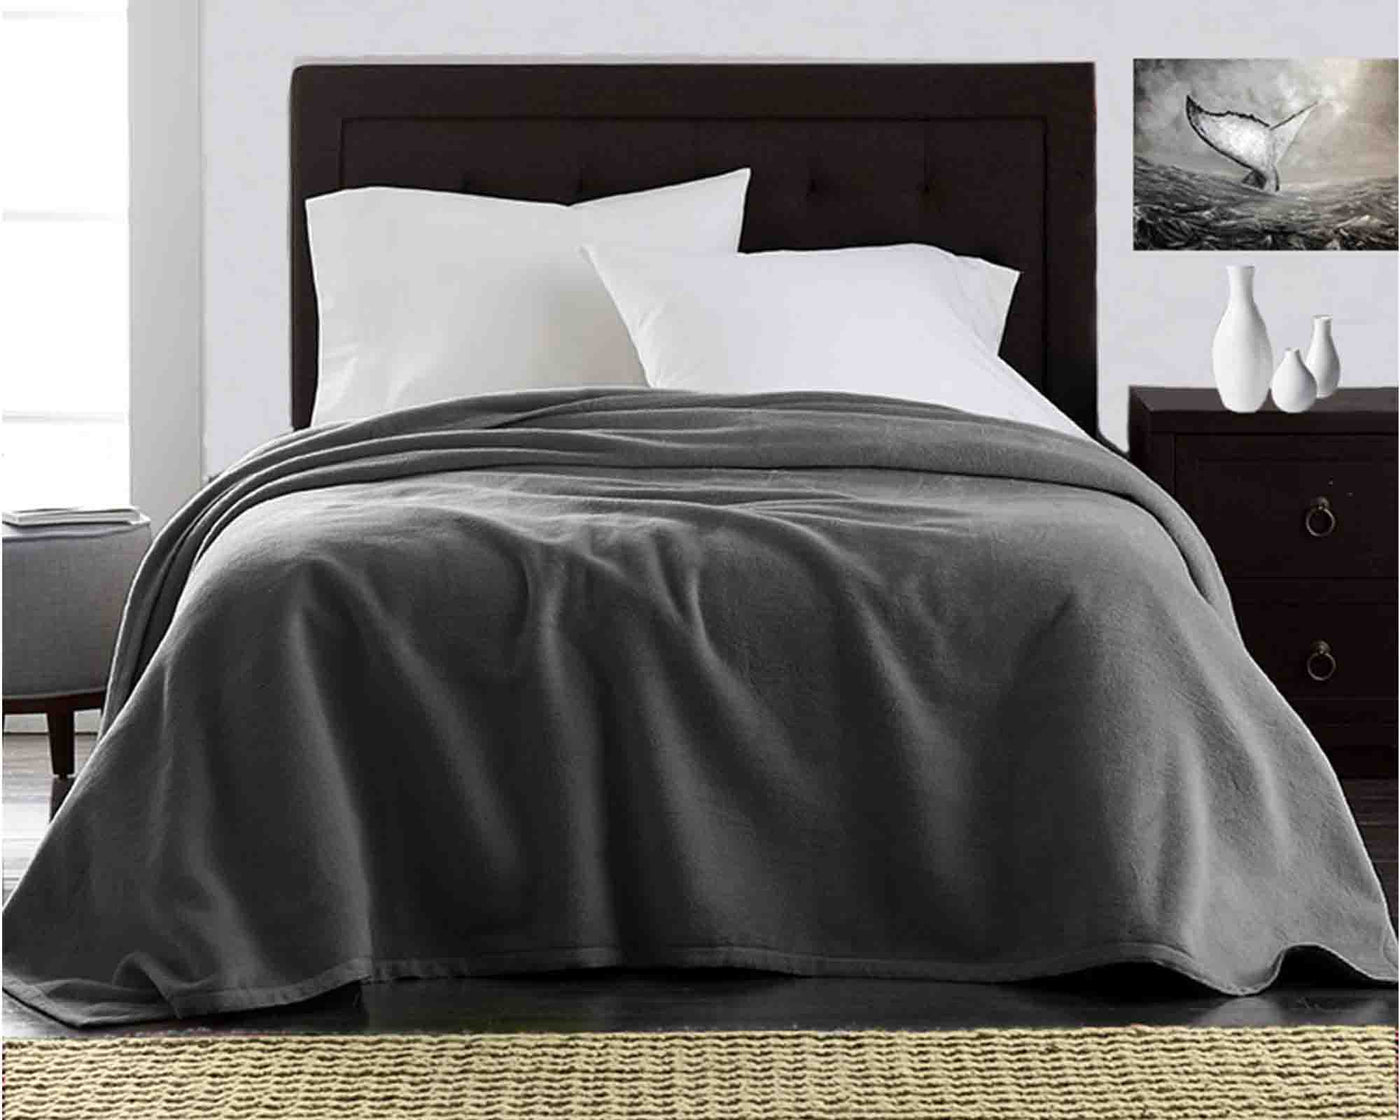 deep charcoal grey ultra plush fleece blanket on bed with white hypoallergenic pillows#colour_deep-charcoal-grey